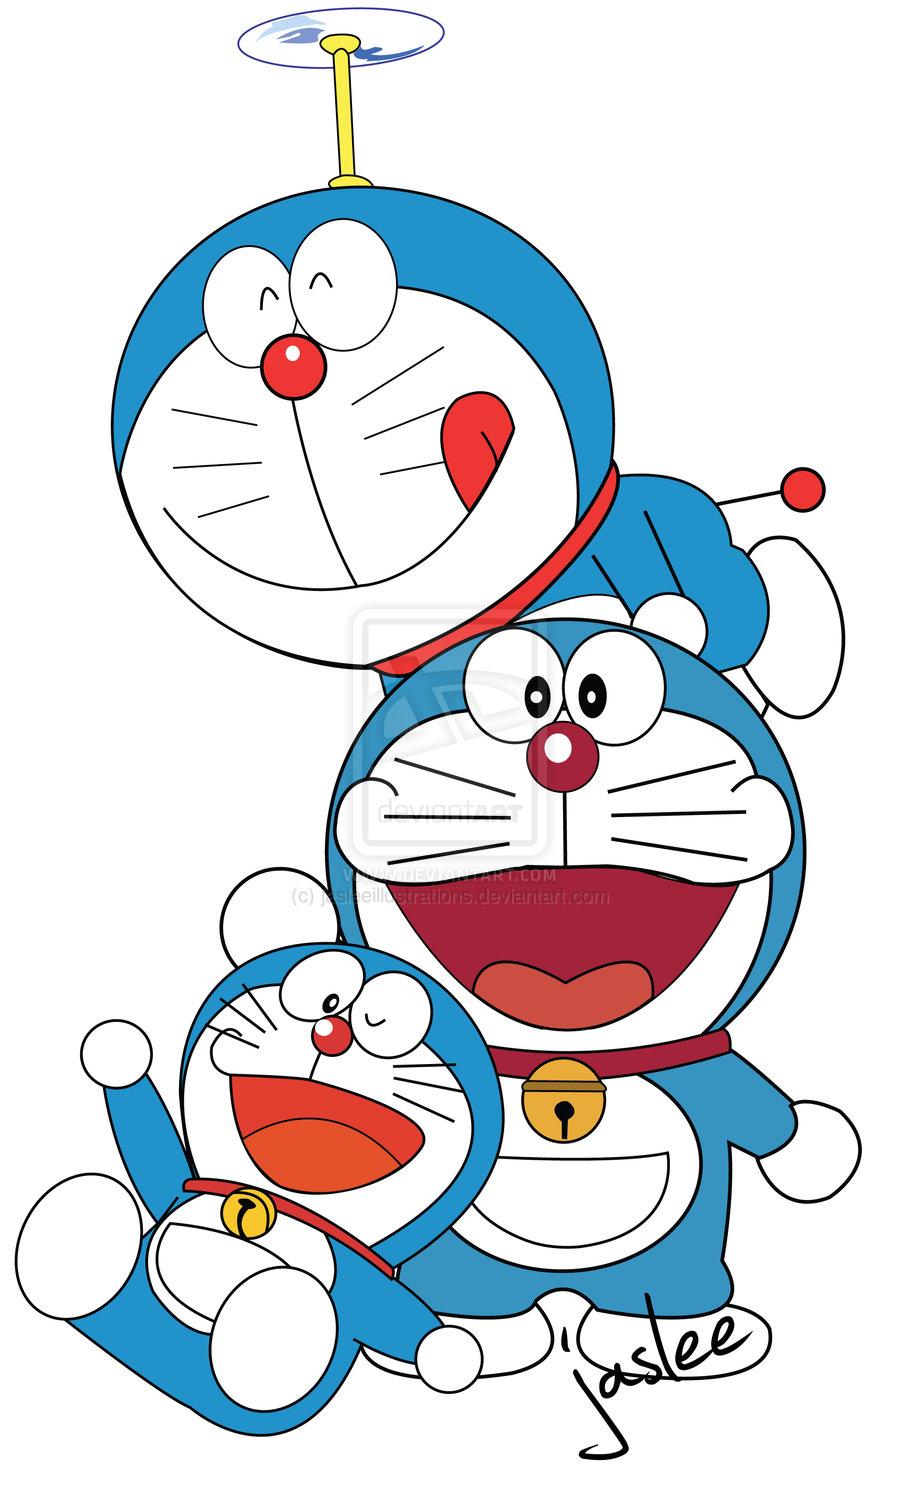 Japanese Doraemon Android Wallpapers - Wallpaper Cave